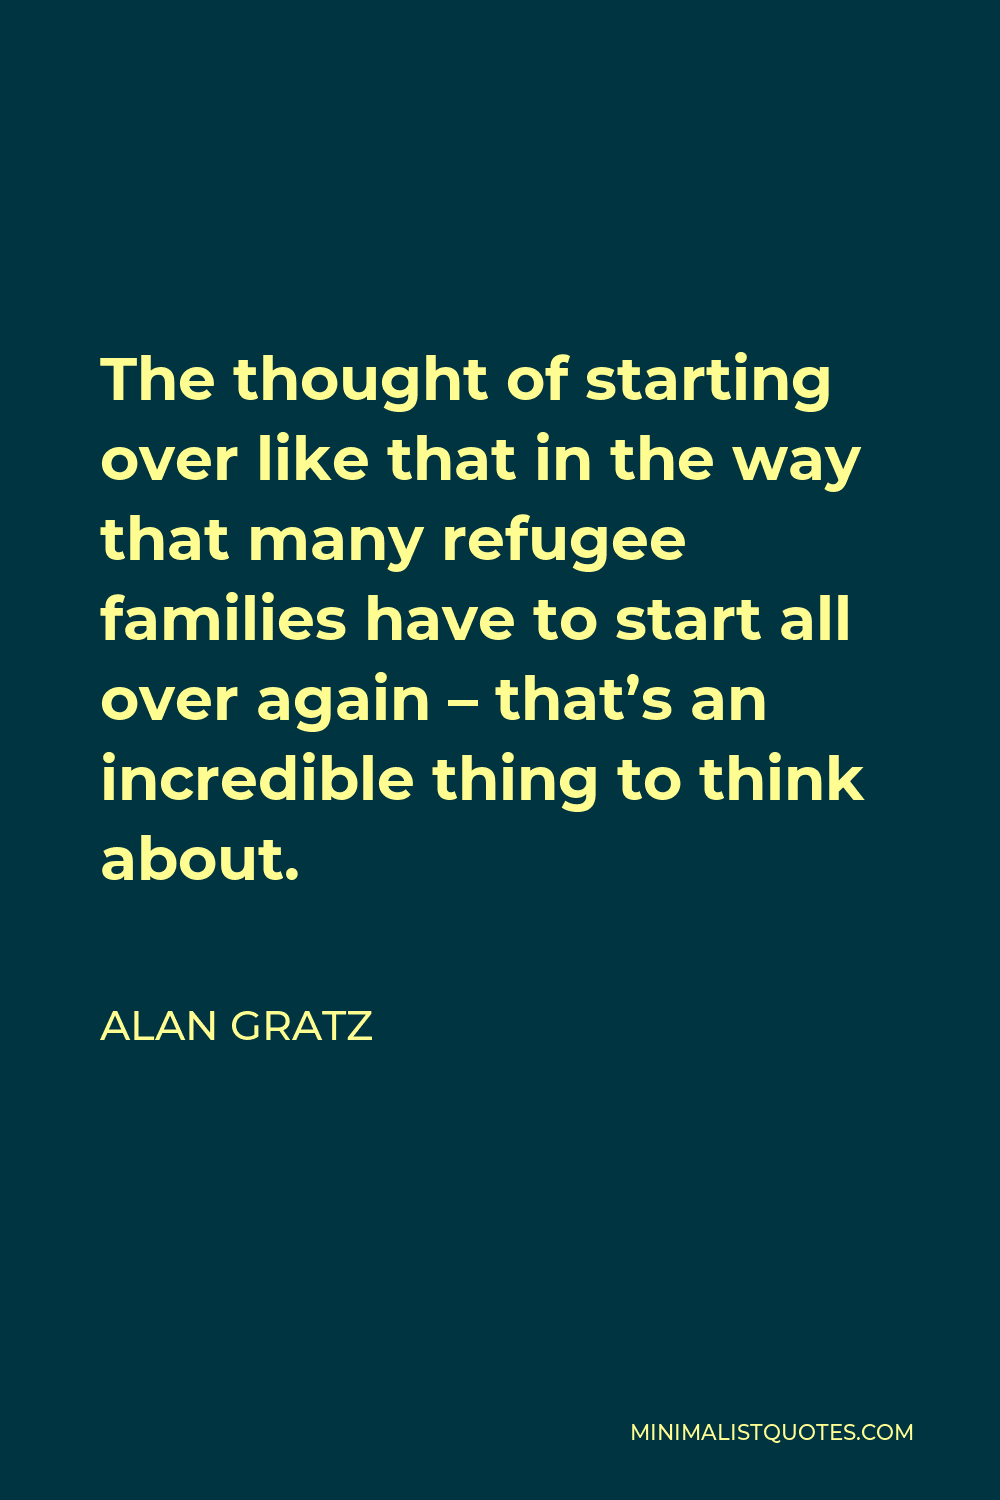 Alan Gratz Quote - The thought of starting over like that in the way that many refugee families have to start all over again – that’s an incredible thing to think about.